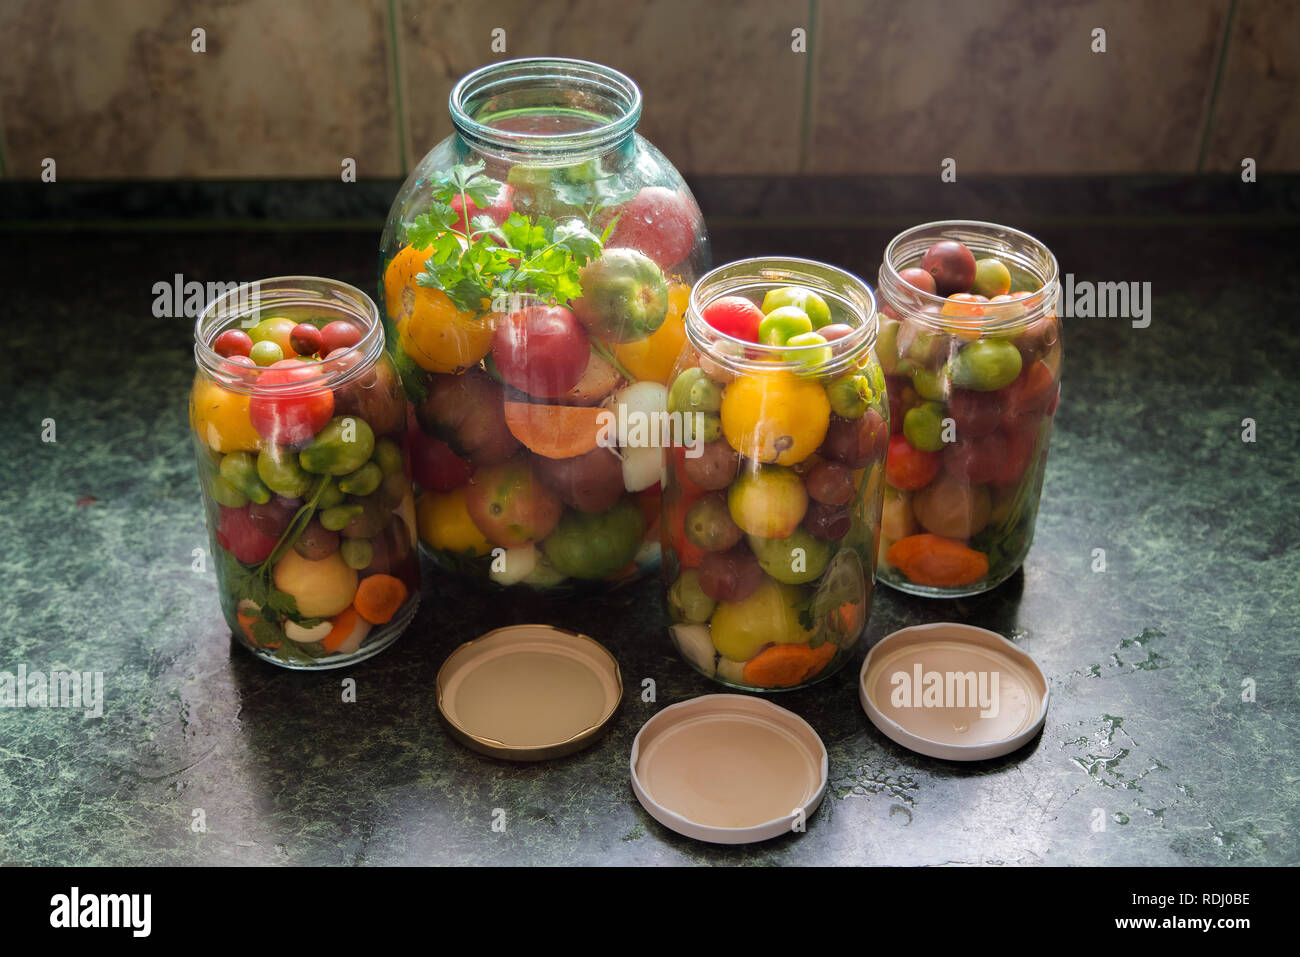 Jars of pickled vegetables. Traditional marinated food - tomatoes, pickles, onions Stock Photo